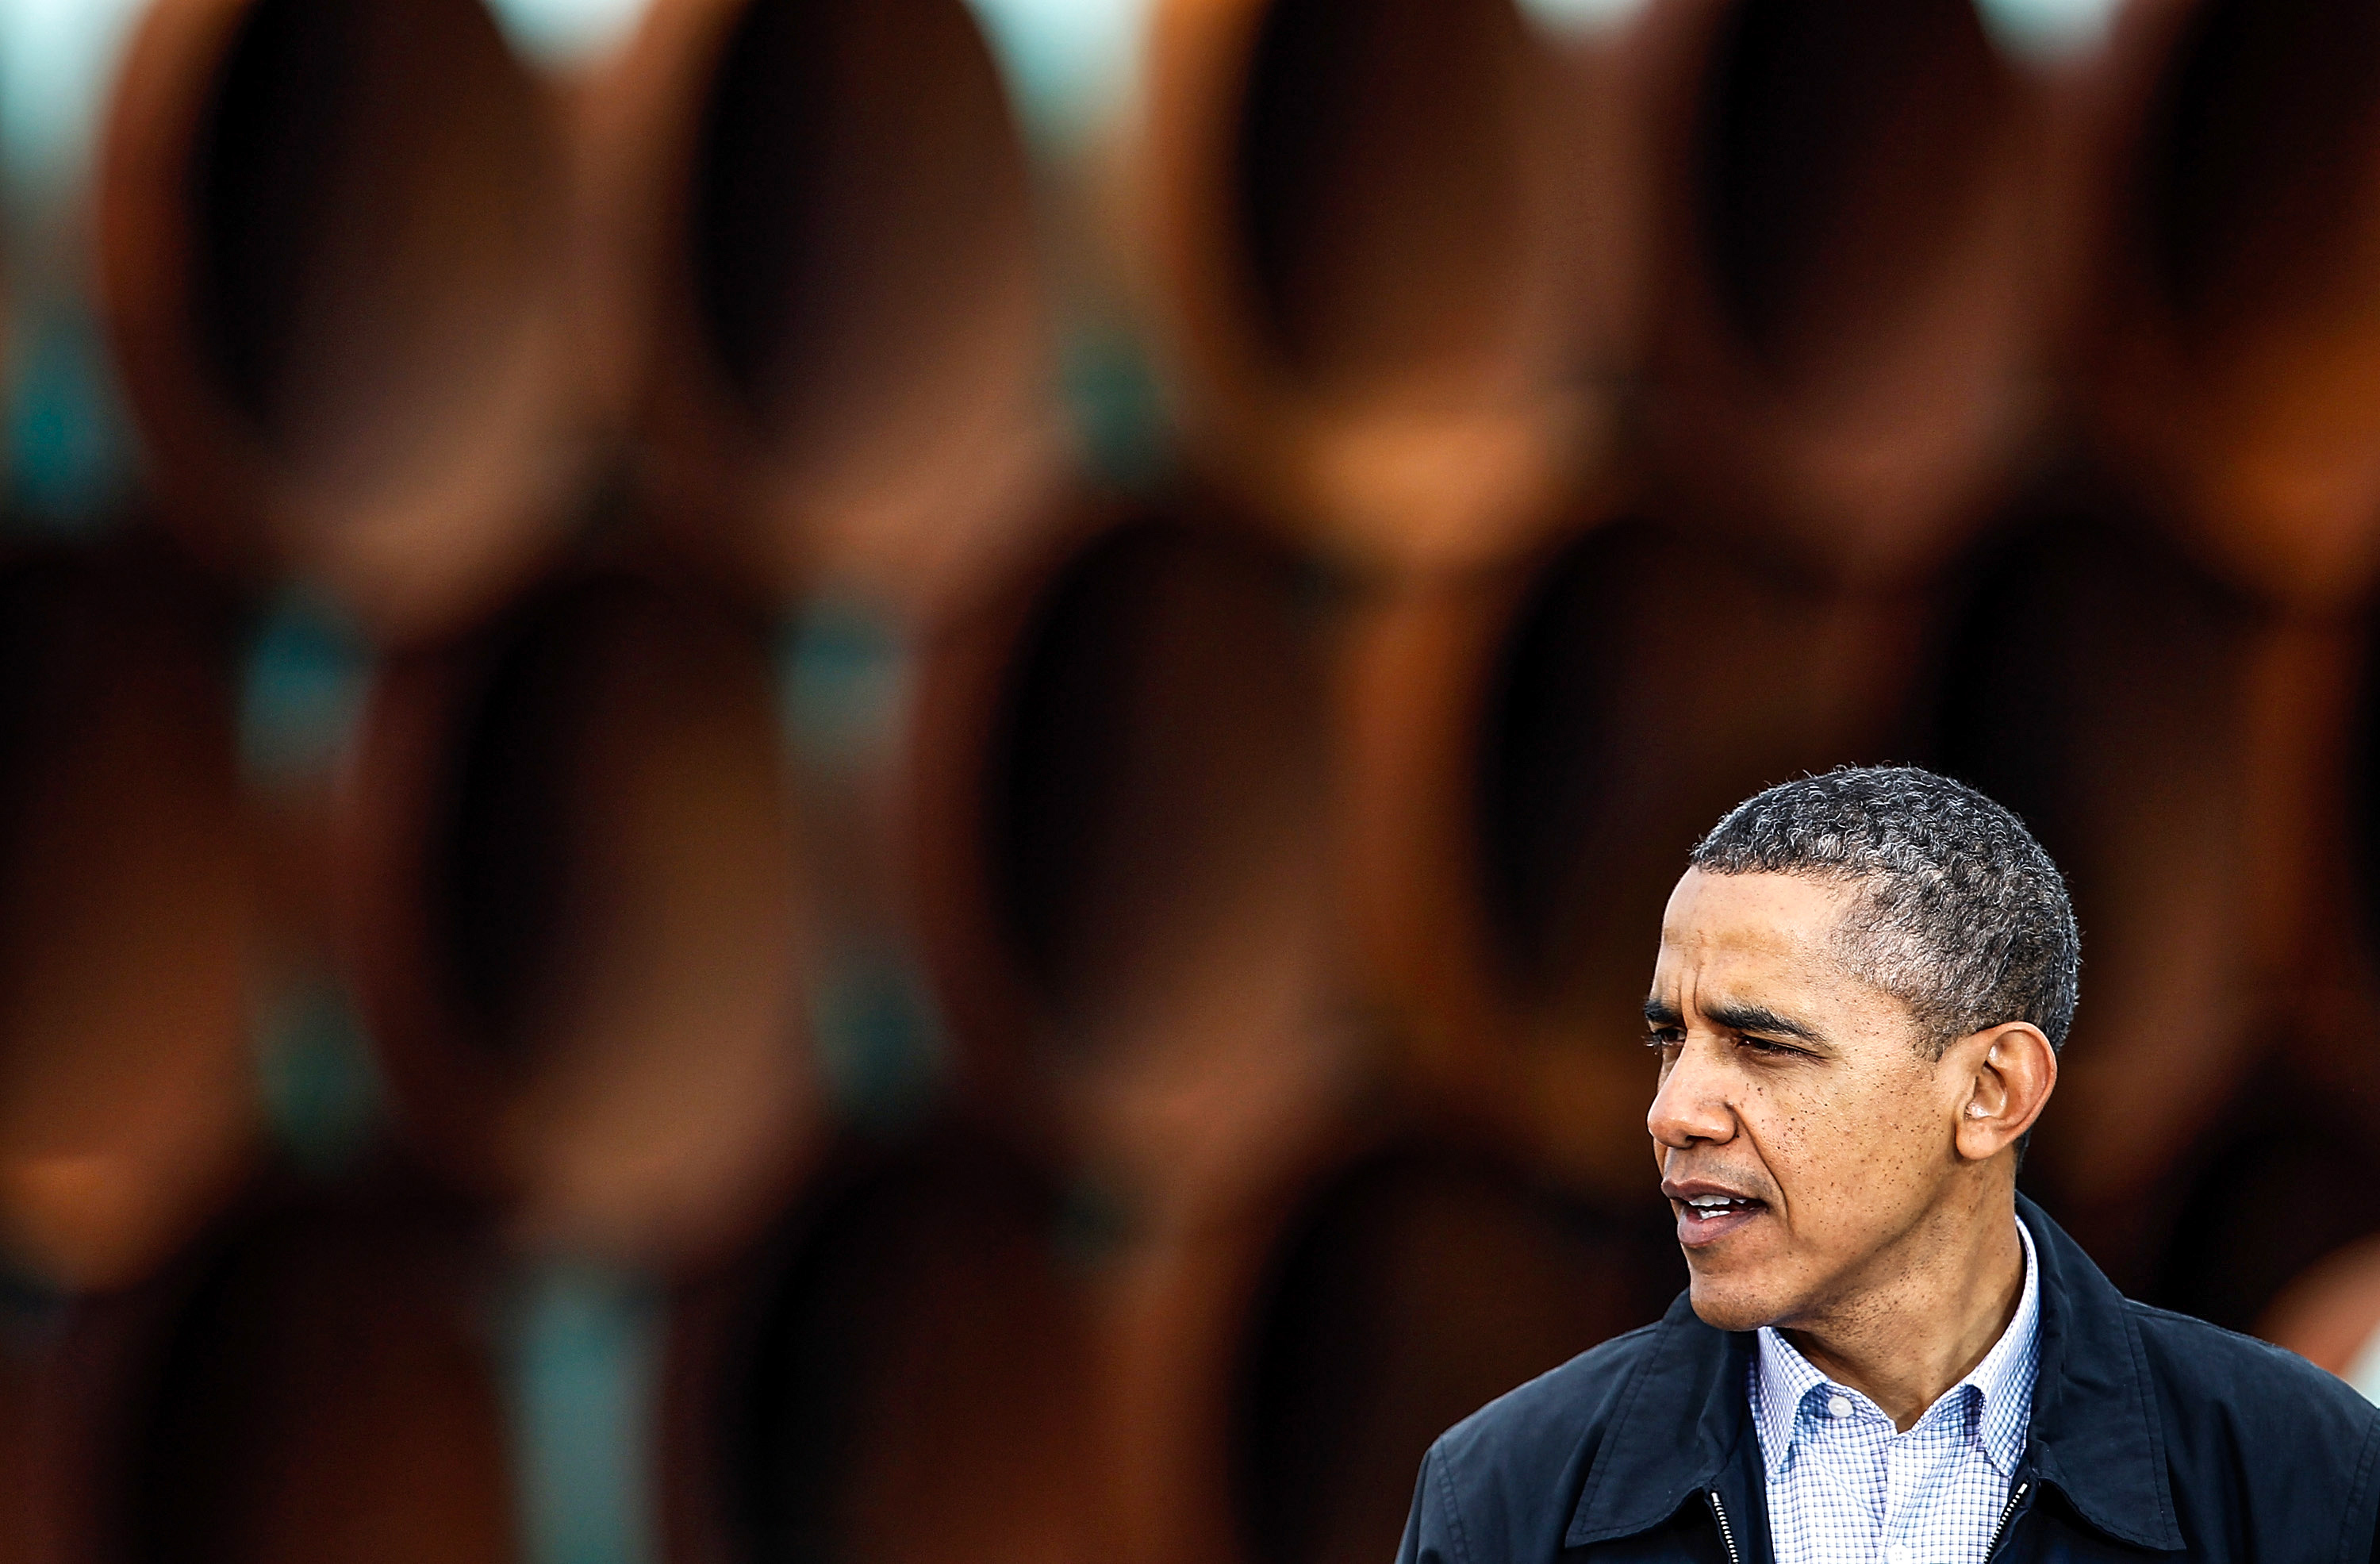 President Obama speaks at the southern site of the Keystone pipeline in 2012.